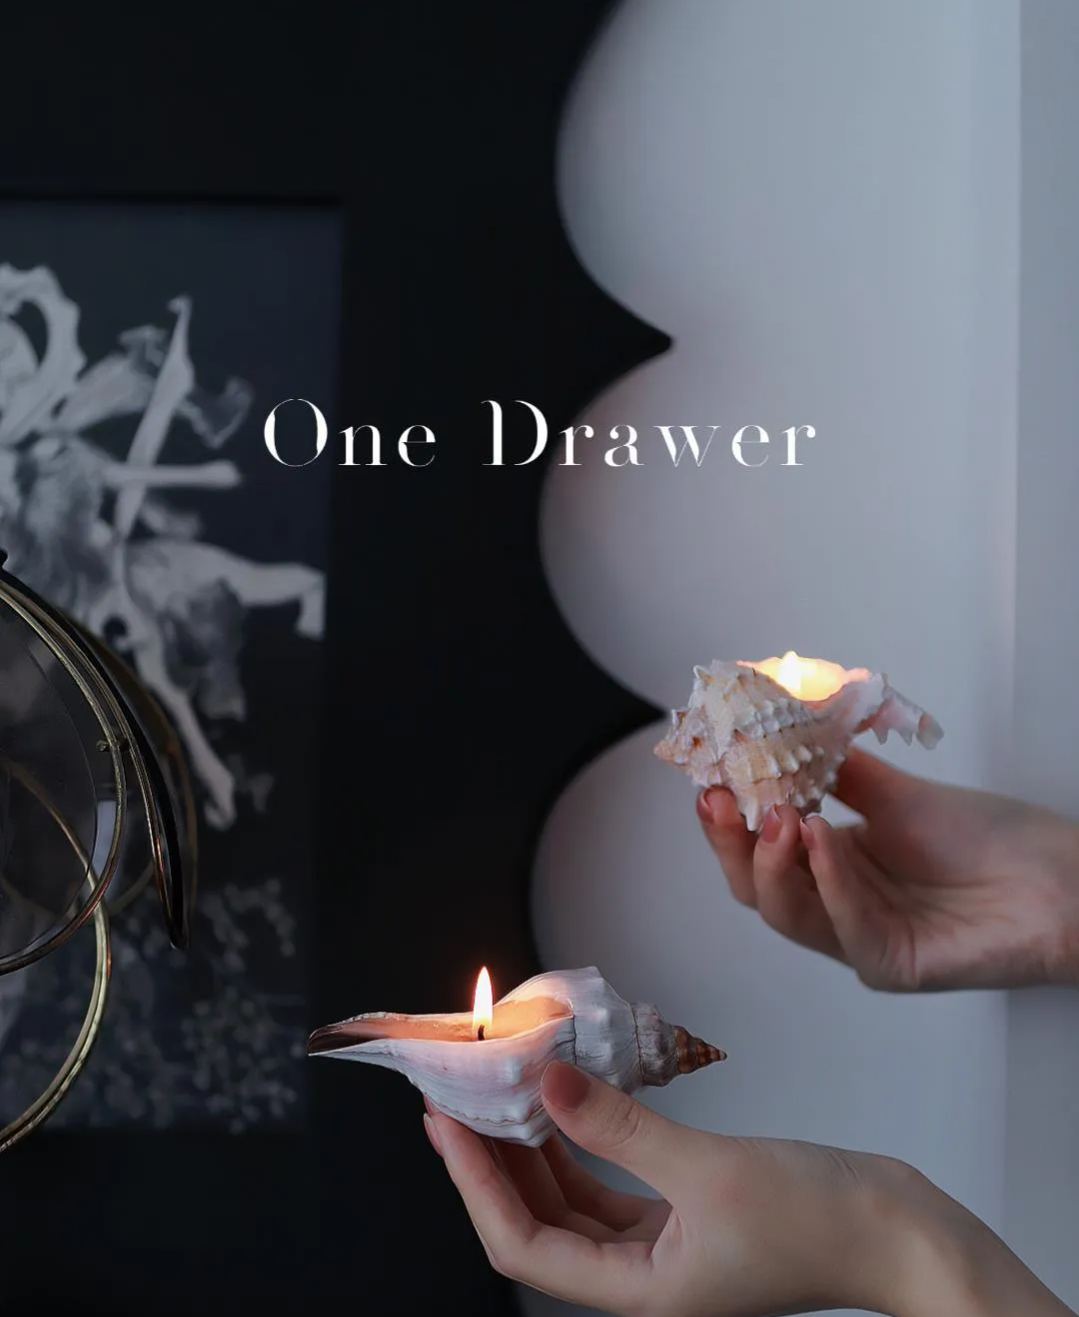 Wholesale One Drawer Hand-Made Niche Conch Aromatherapy Candle Bedroom Decoration Fragrance Sleep Aid Soothing Nerves Birthday Gift